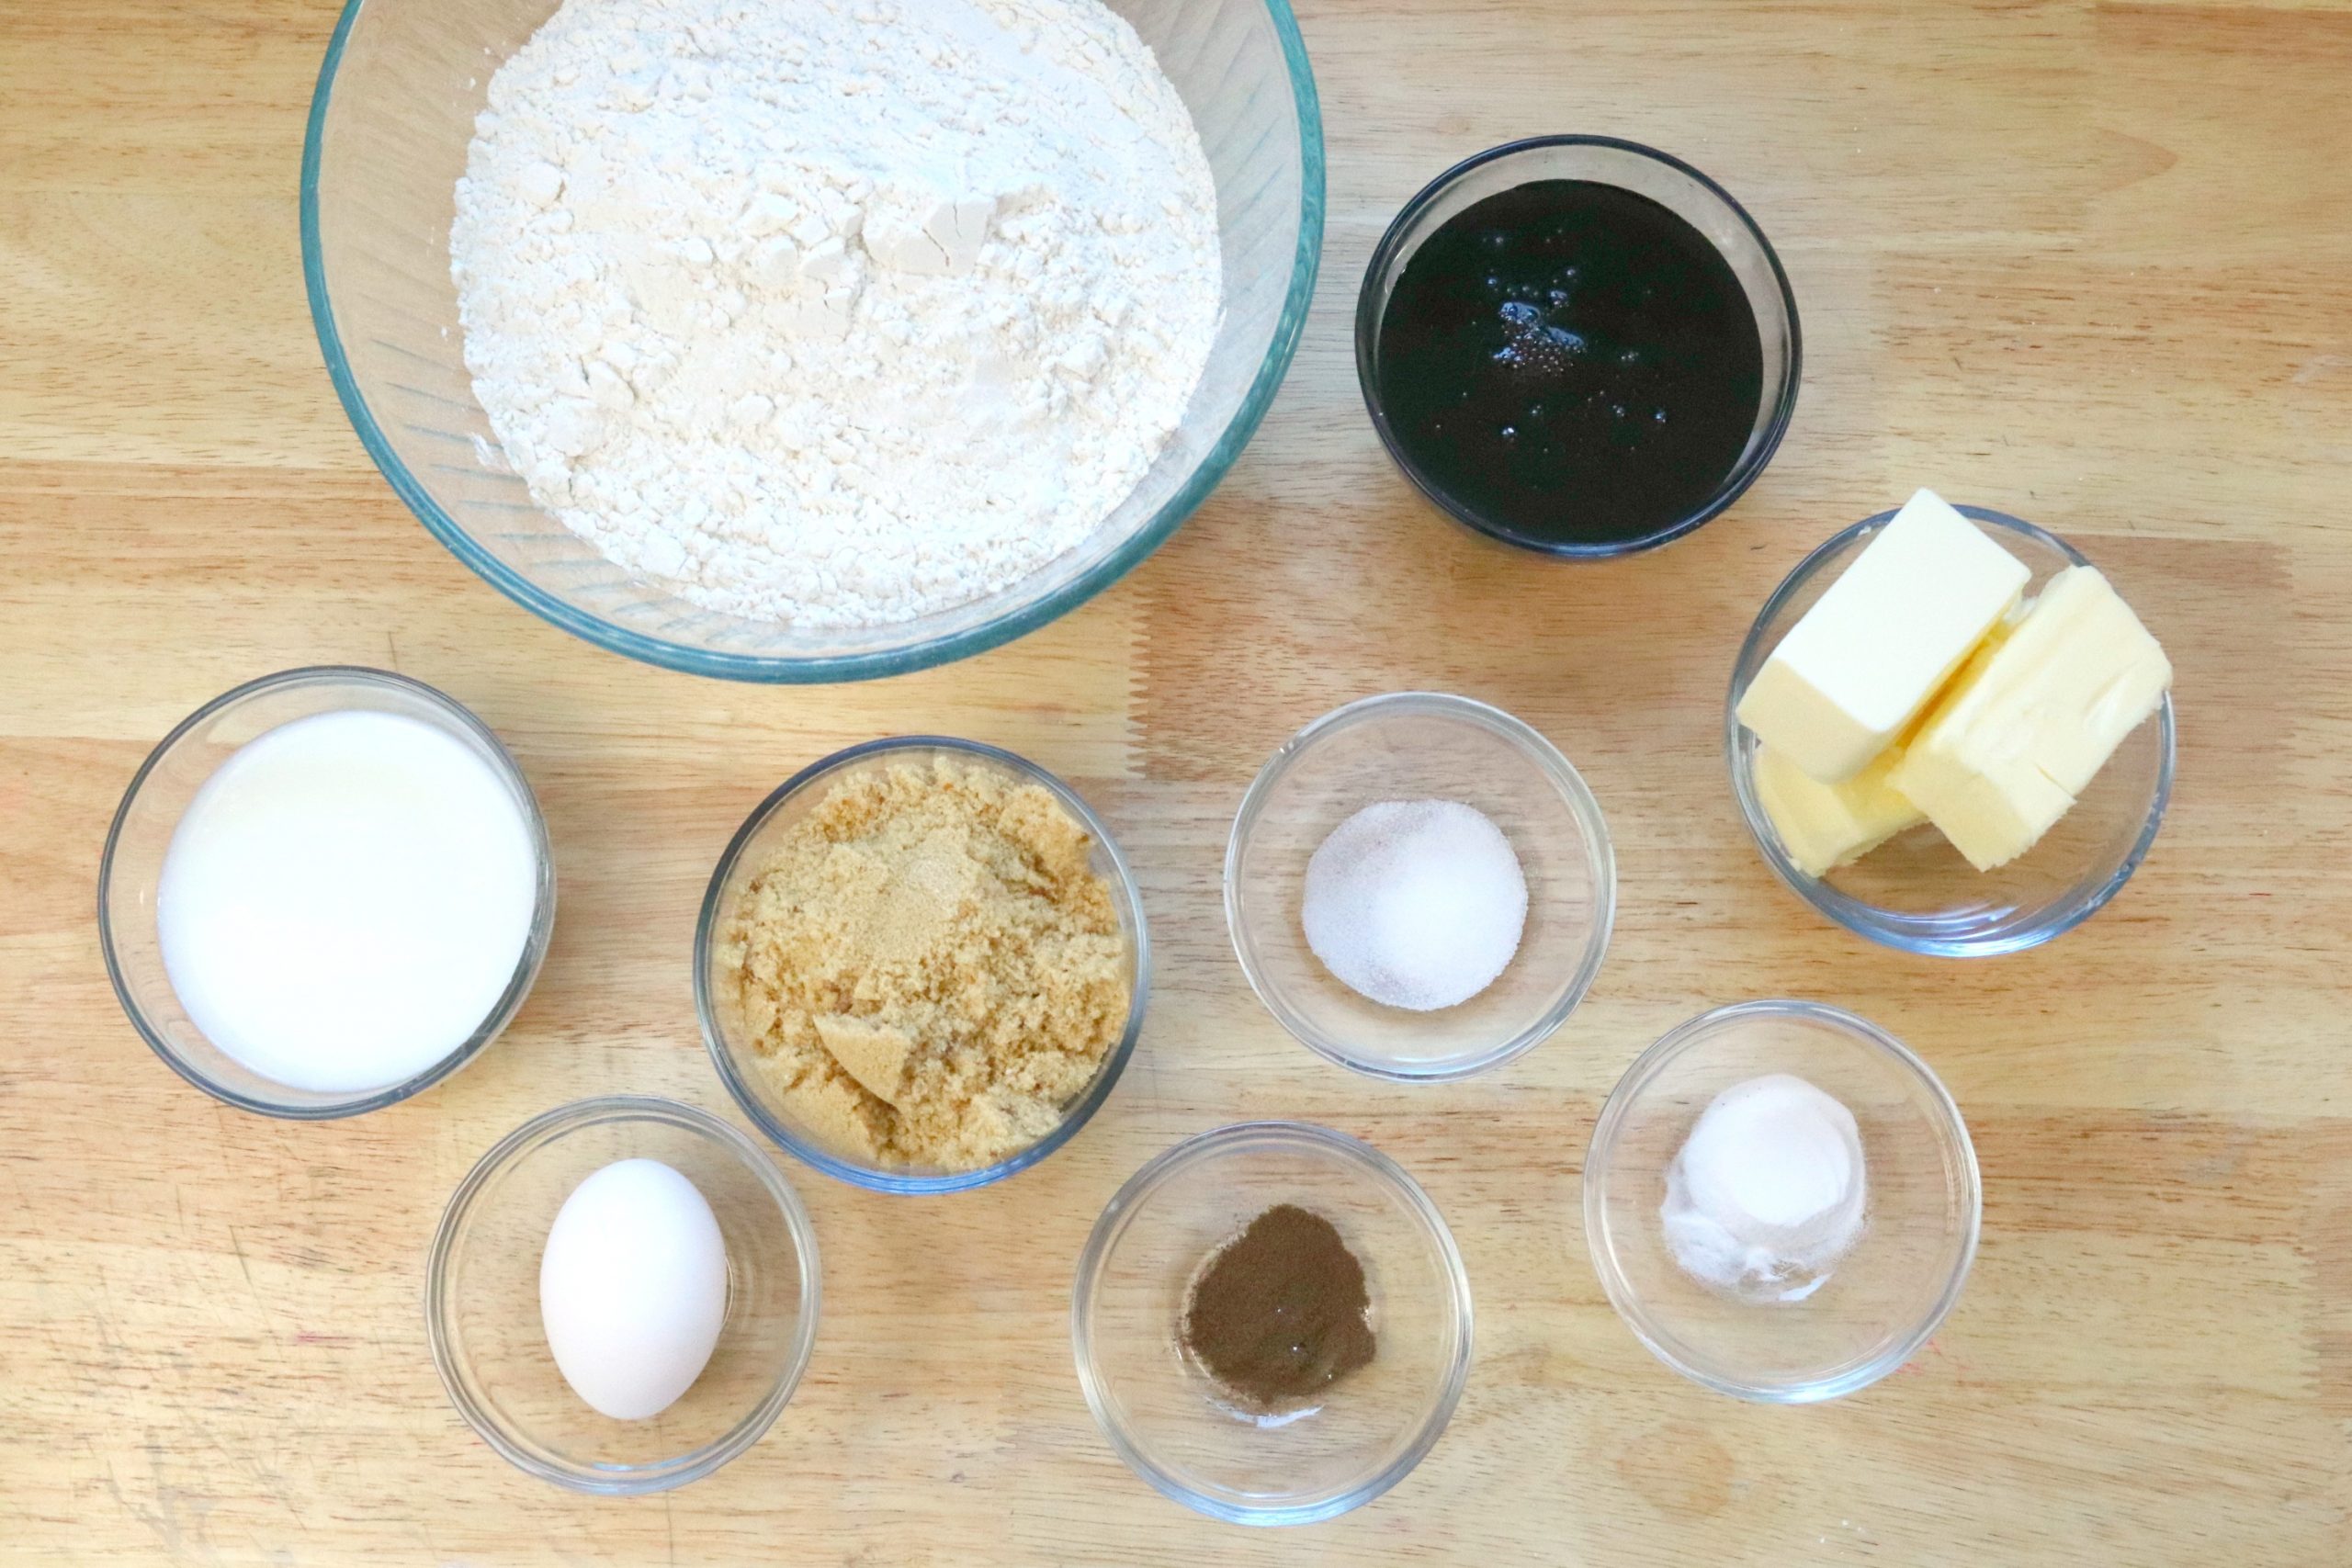 ingredients for Whoopie Pies in clear glass bowls sitting on a wooden table